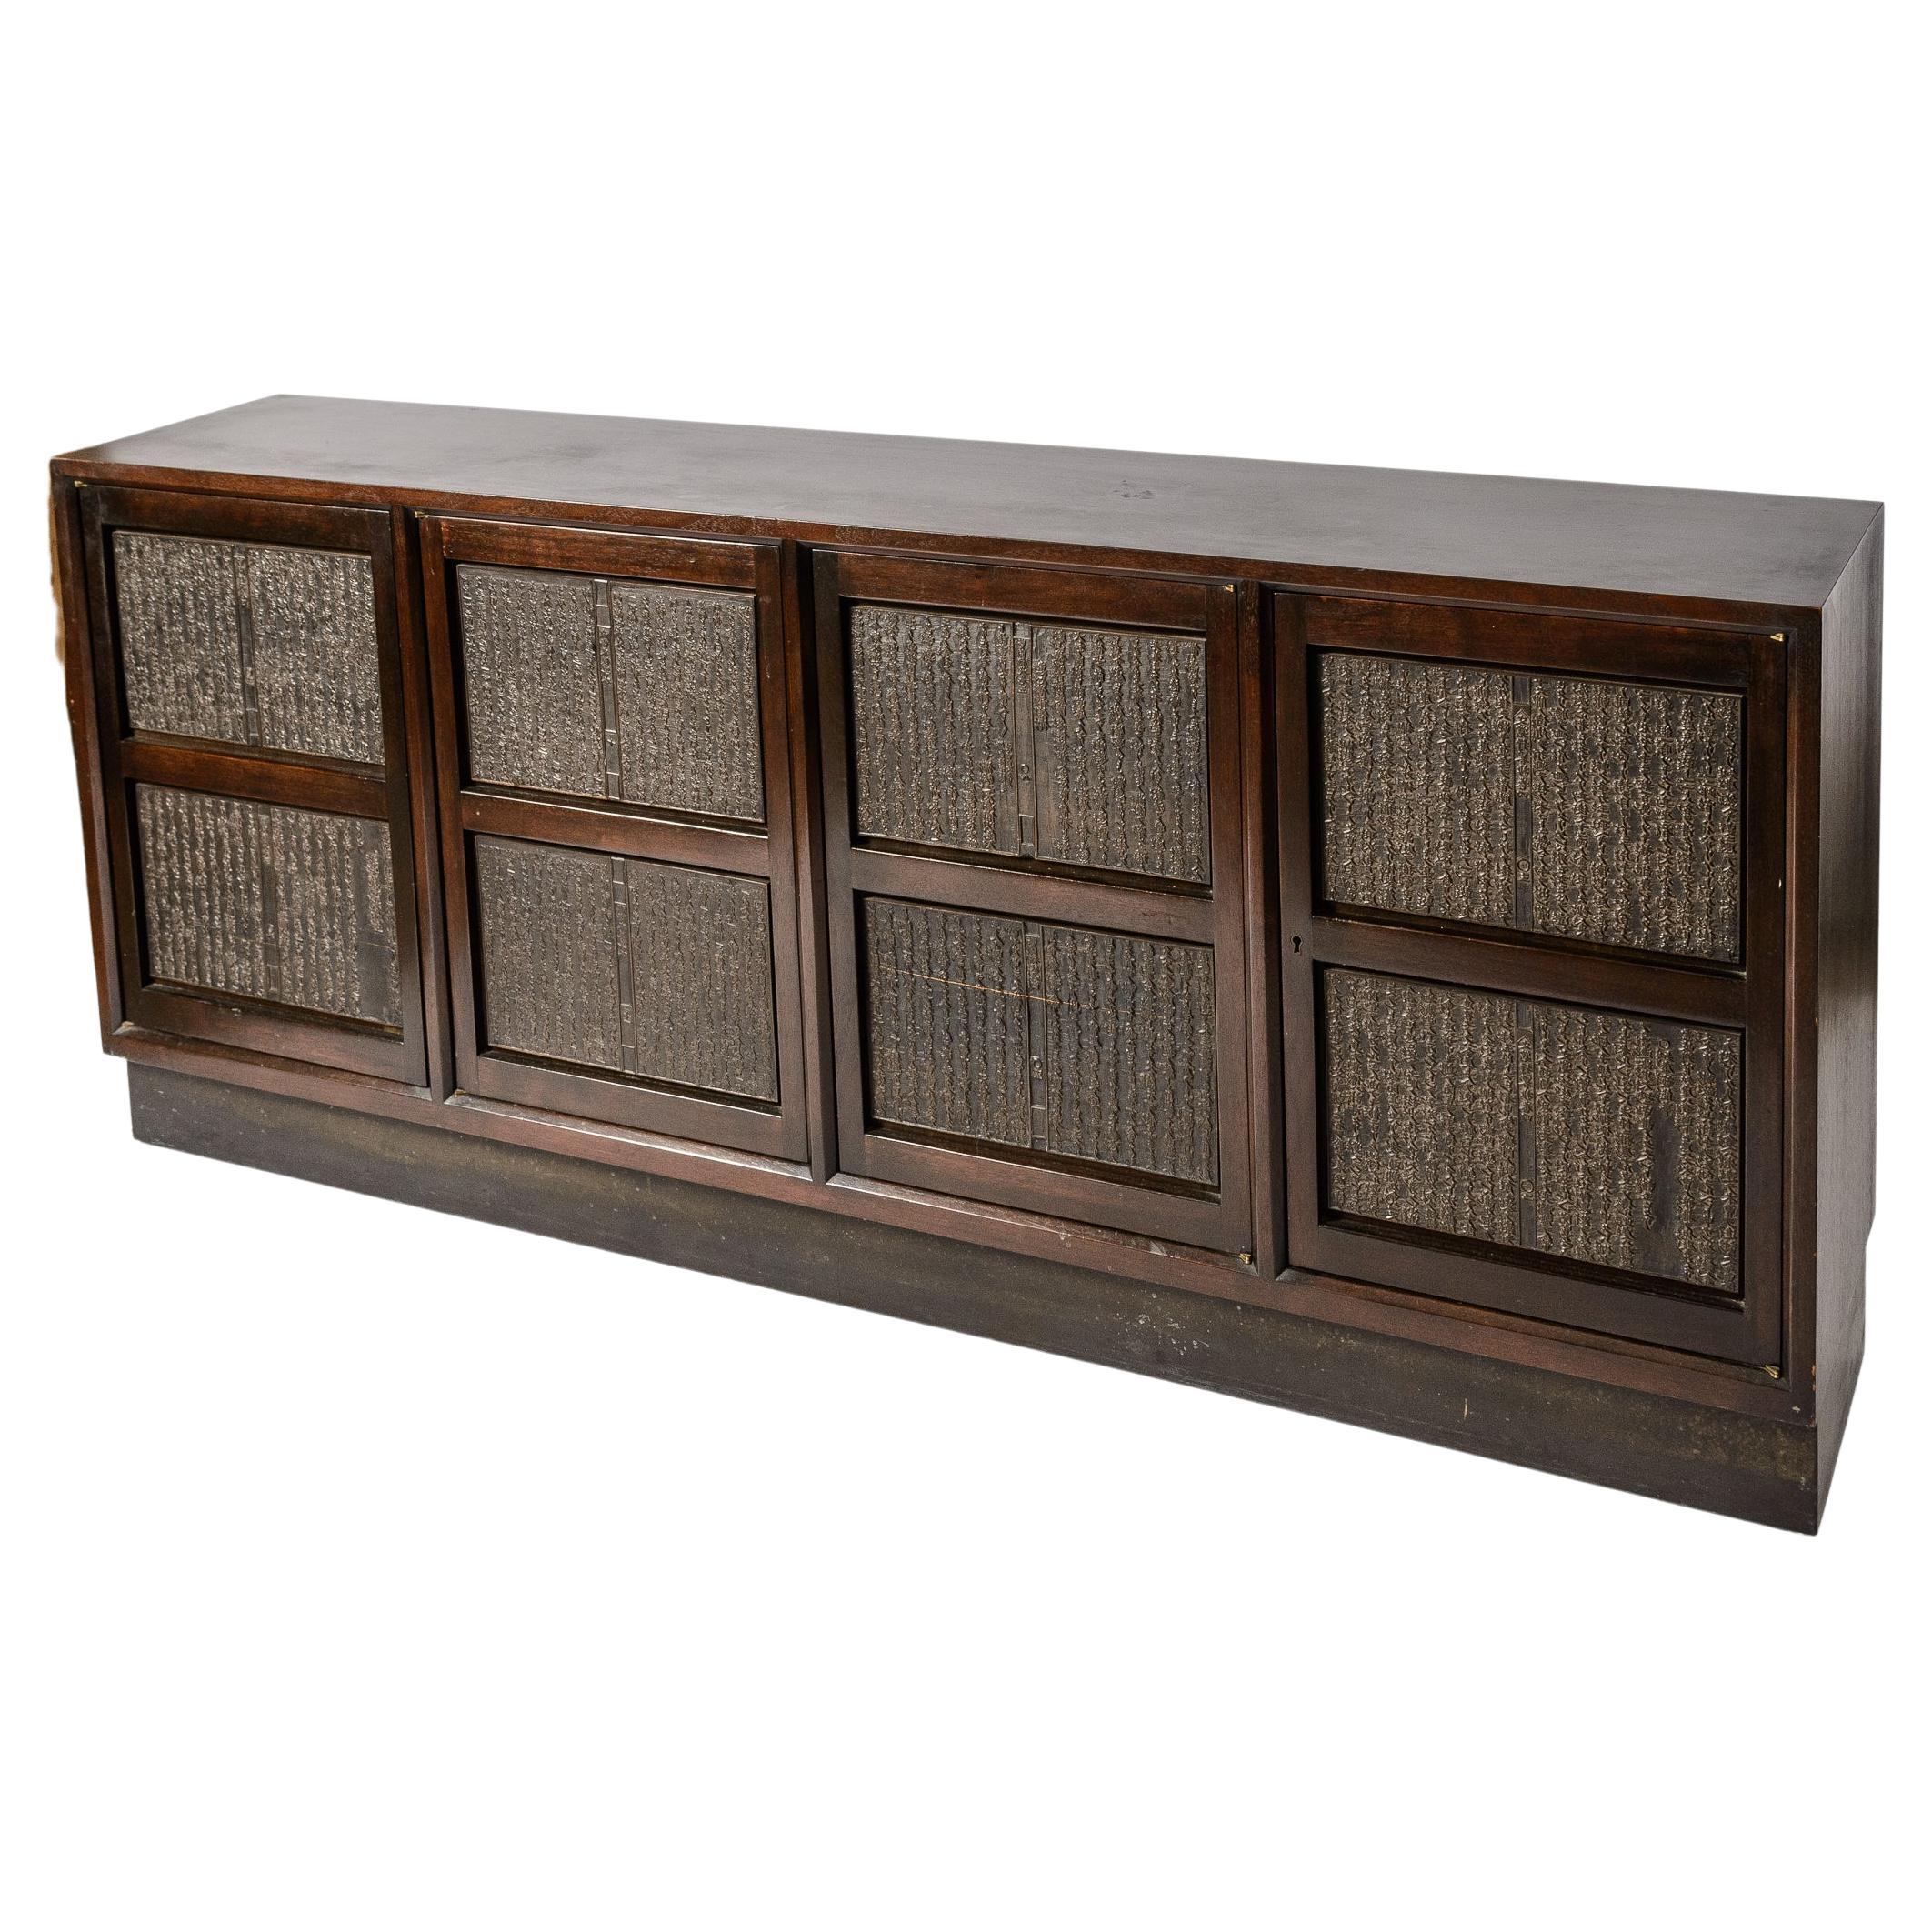 Edward Wormley Japanese Print Block Cabinet For Sale